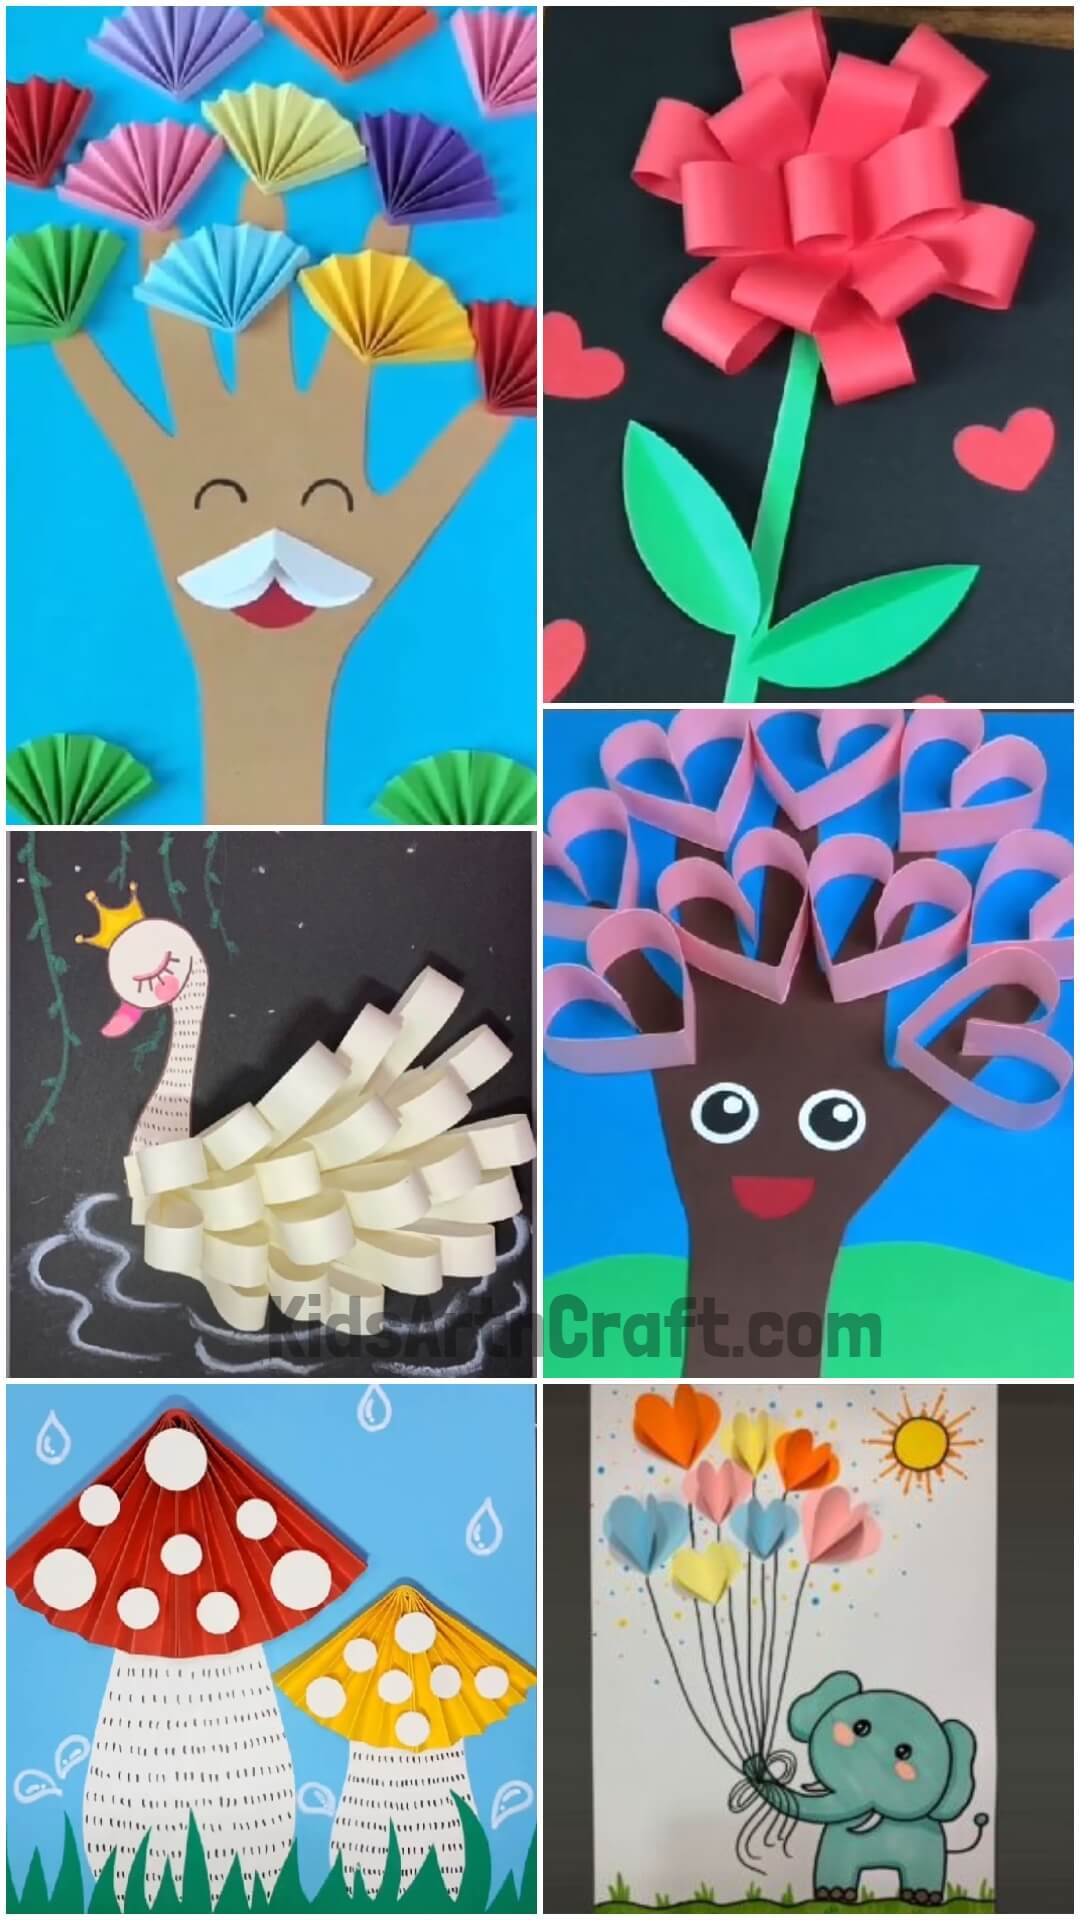 Easy Paper Crafts for Kids - Simple Craft Anyone Can Do